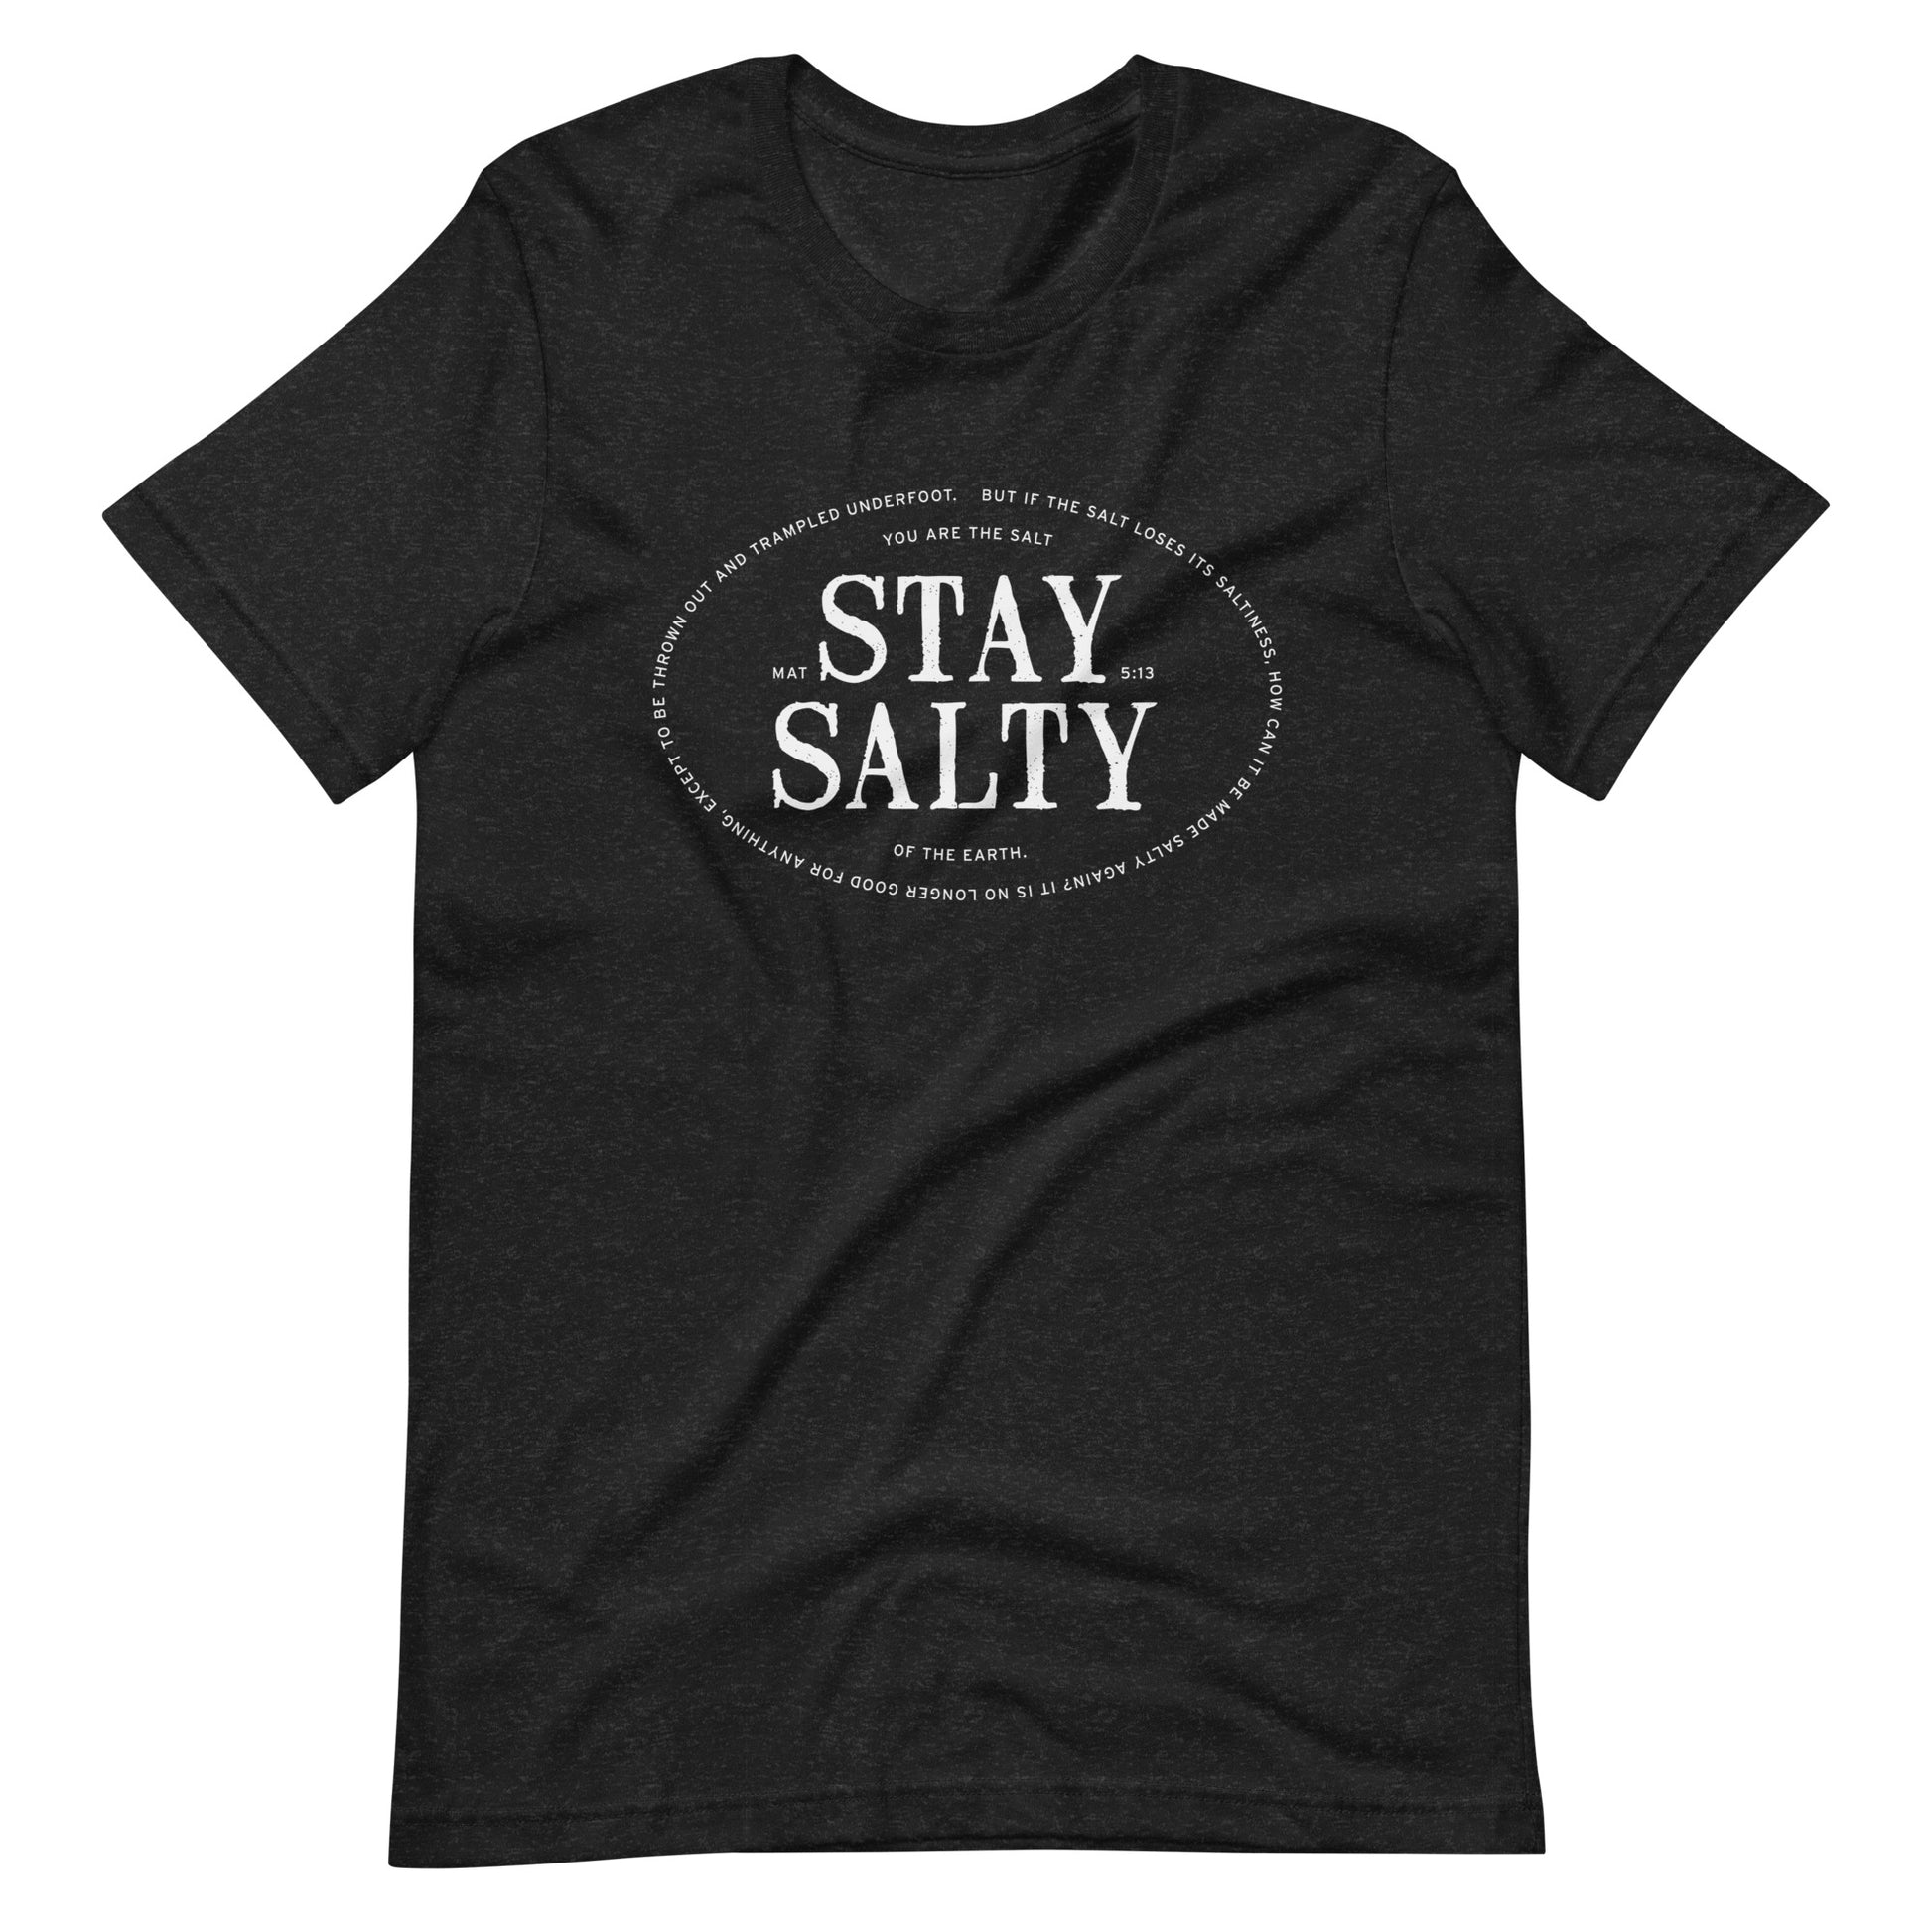 Unisex T-shirt - Stay Salty - A Thousand Elsewhere